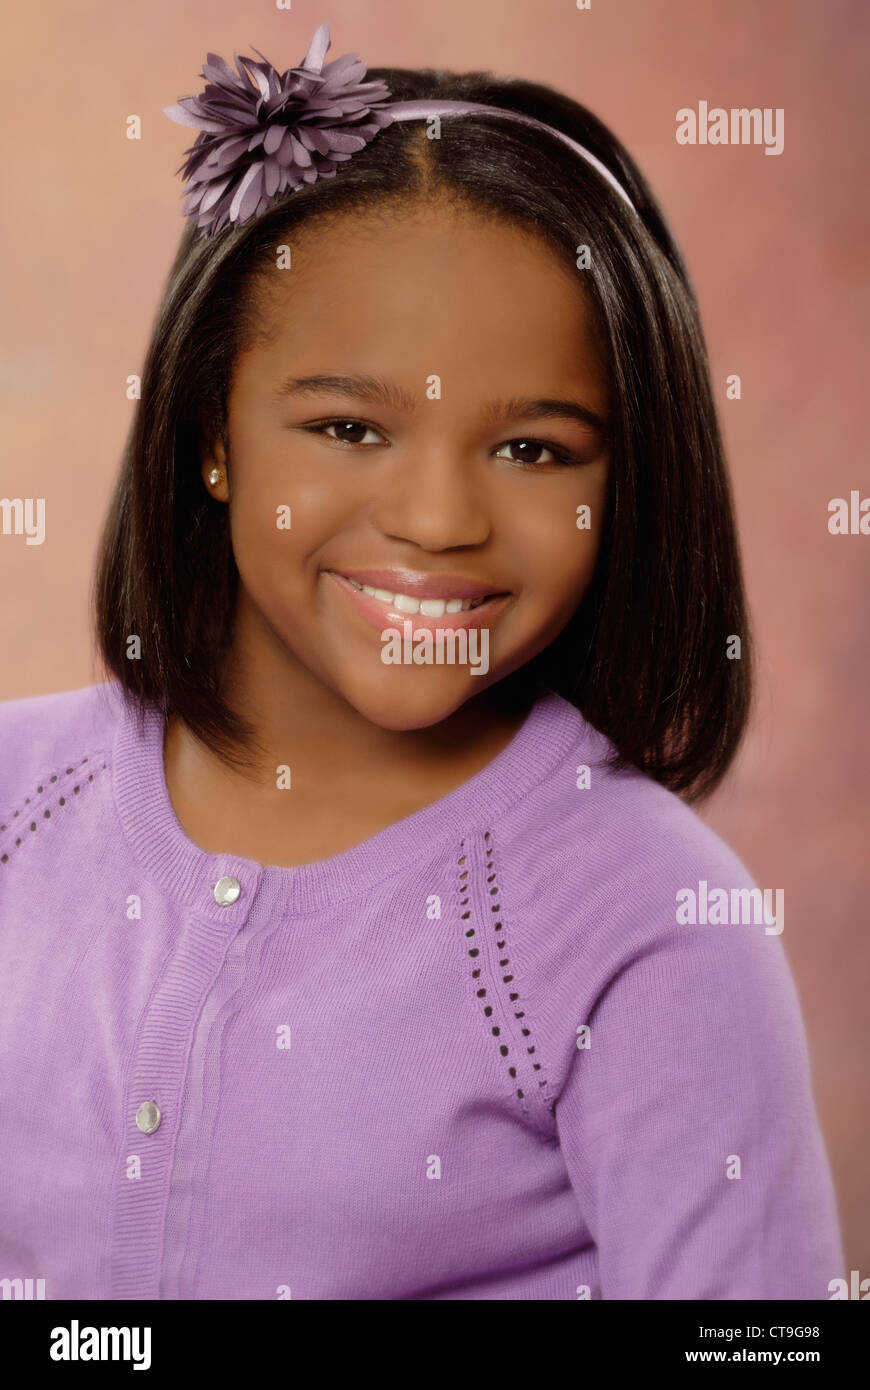 Portrait of a pretty, smiling ten year old girl, African-American ethnicity. Stock Photo